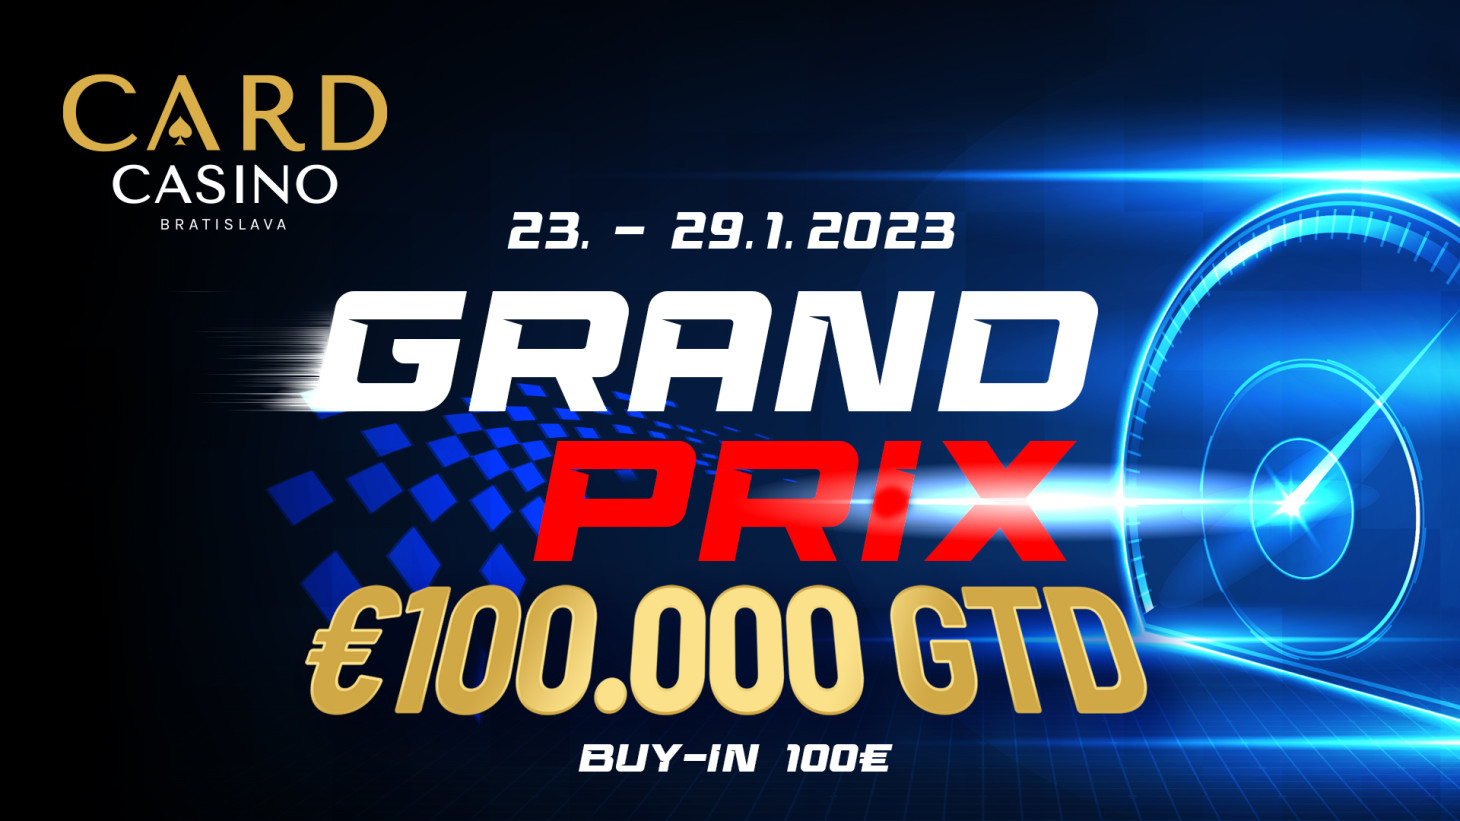 The next edition of the €100,000 Grand Prix will be played in Carde in late January 2023